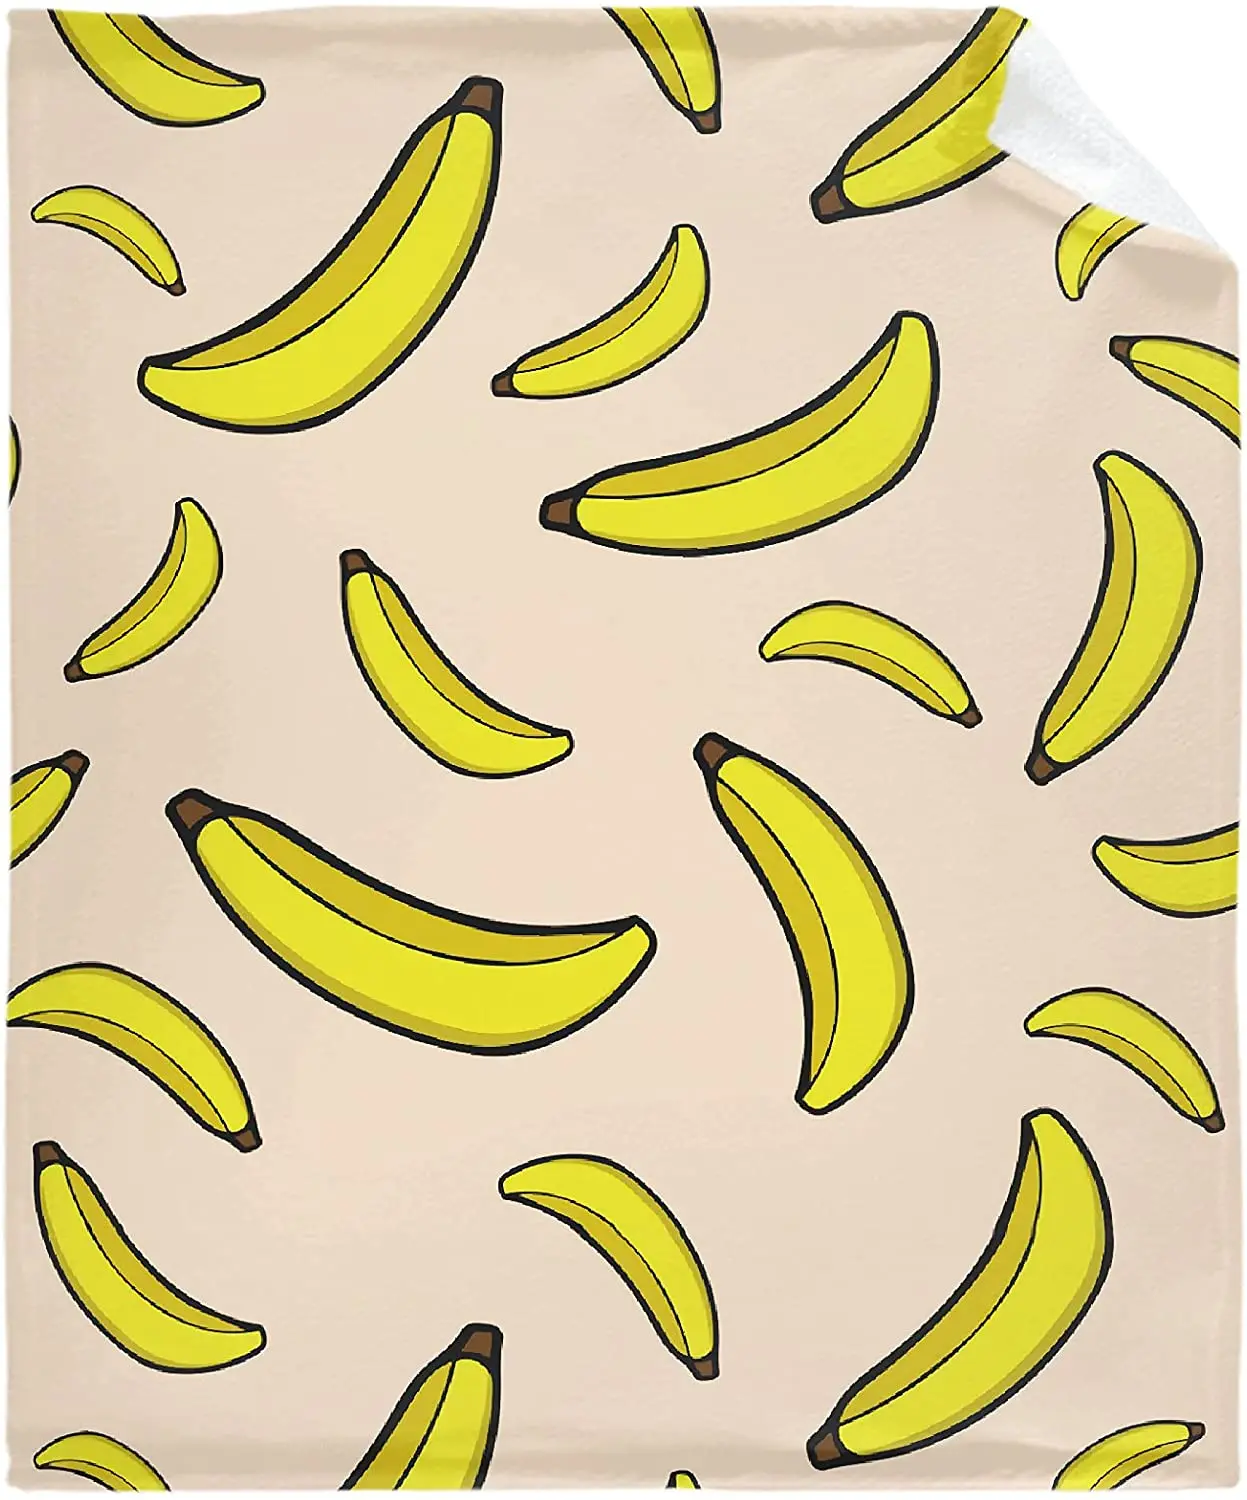 

Qutown Summer Yellow Banana Fruit Blanket Throw Soft Lightweight Warm Cozy Flannel Fleece Women Adults and Kids Gifts for Couch